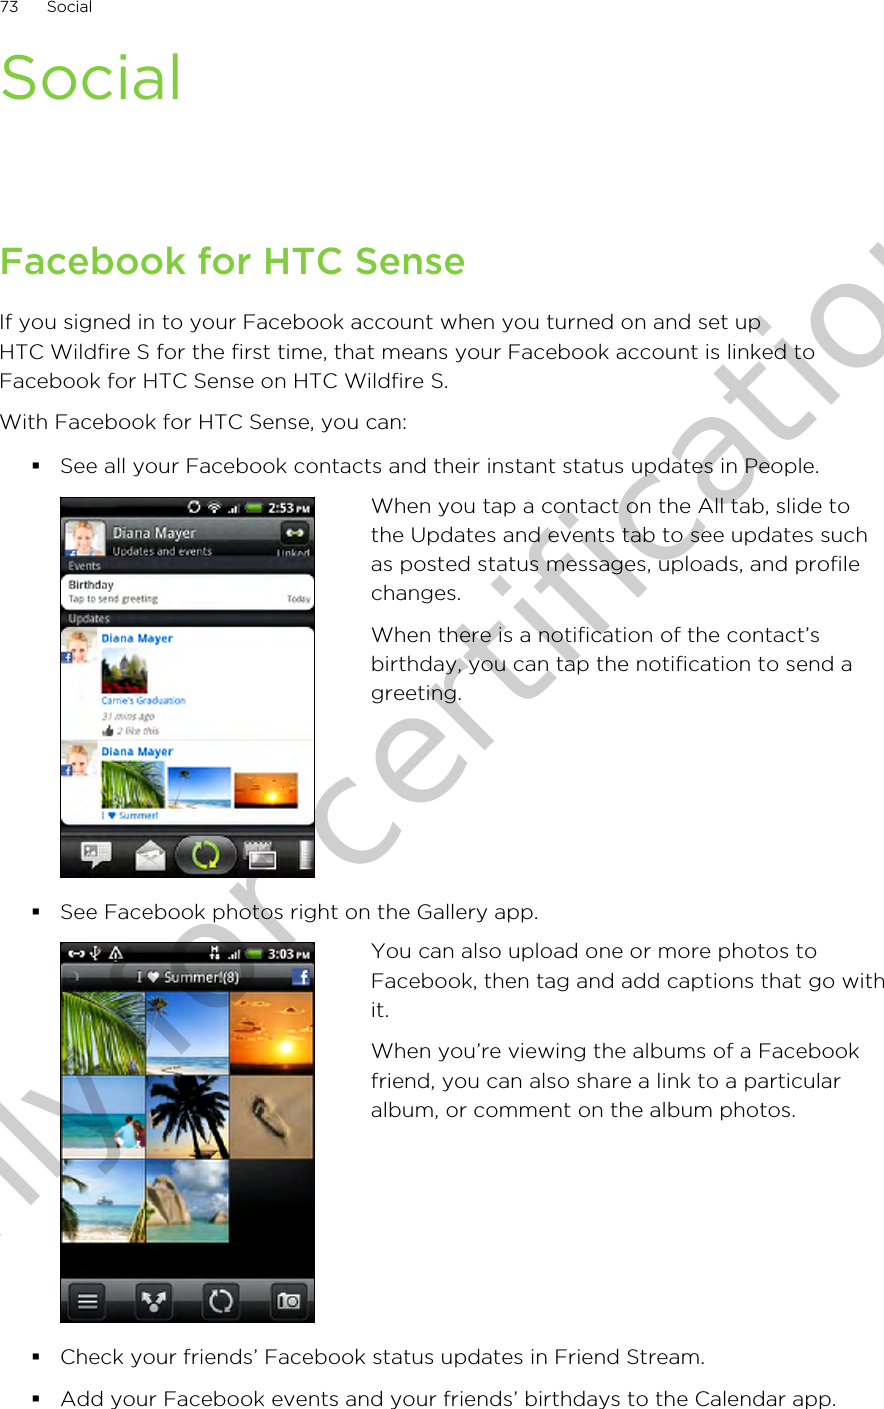 SocialFacebook for HTC SenseIf you signed in to your Facebook account when you turned on and set upHTC Wildfire S for the first time, that means your Facebook account is linked toFacebook for HTC Sense on HTC Wildfire S.With Facebook for HTC Sense, you can:§See all your Facebook contacts and their instant status updates in People.When you tap a contact on the All tab, slide tothe Updates and events tab to see updates suchas posted status messages, uploads, and profilechanges.When there is a notification of the contact’sbirthday, you can tap the notification to send agreeting.§See Facebook photos right on the Gallery app.You can also upload one or more photos toFacebook, then tag and add captions that go withit.When you’re viewing the albums of a Facebookfriend, you can also share a link to a particularalbum, or comment on the album photos.§Check your friends’ Facebook status updates in Friend Stream.§Add your Facebook events and your friends’ birthdays to the Calendar app.73 SocialOnly for certification